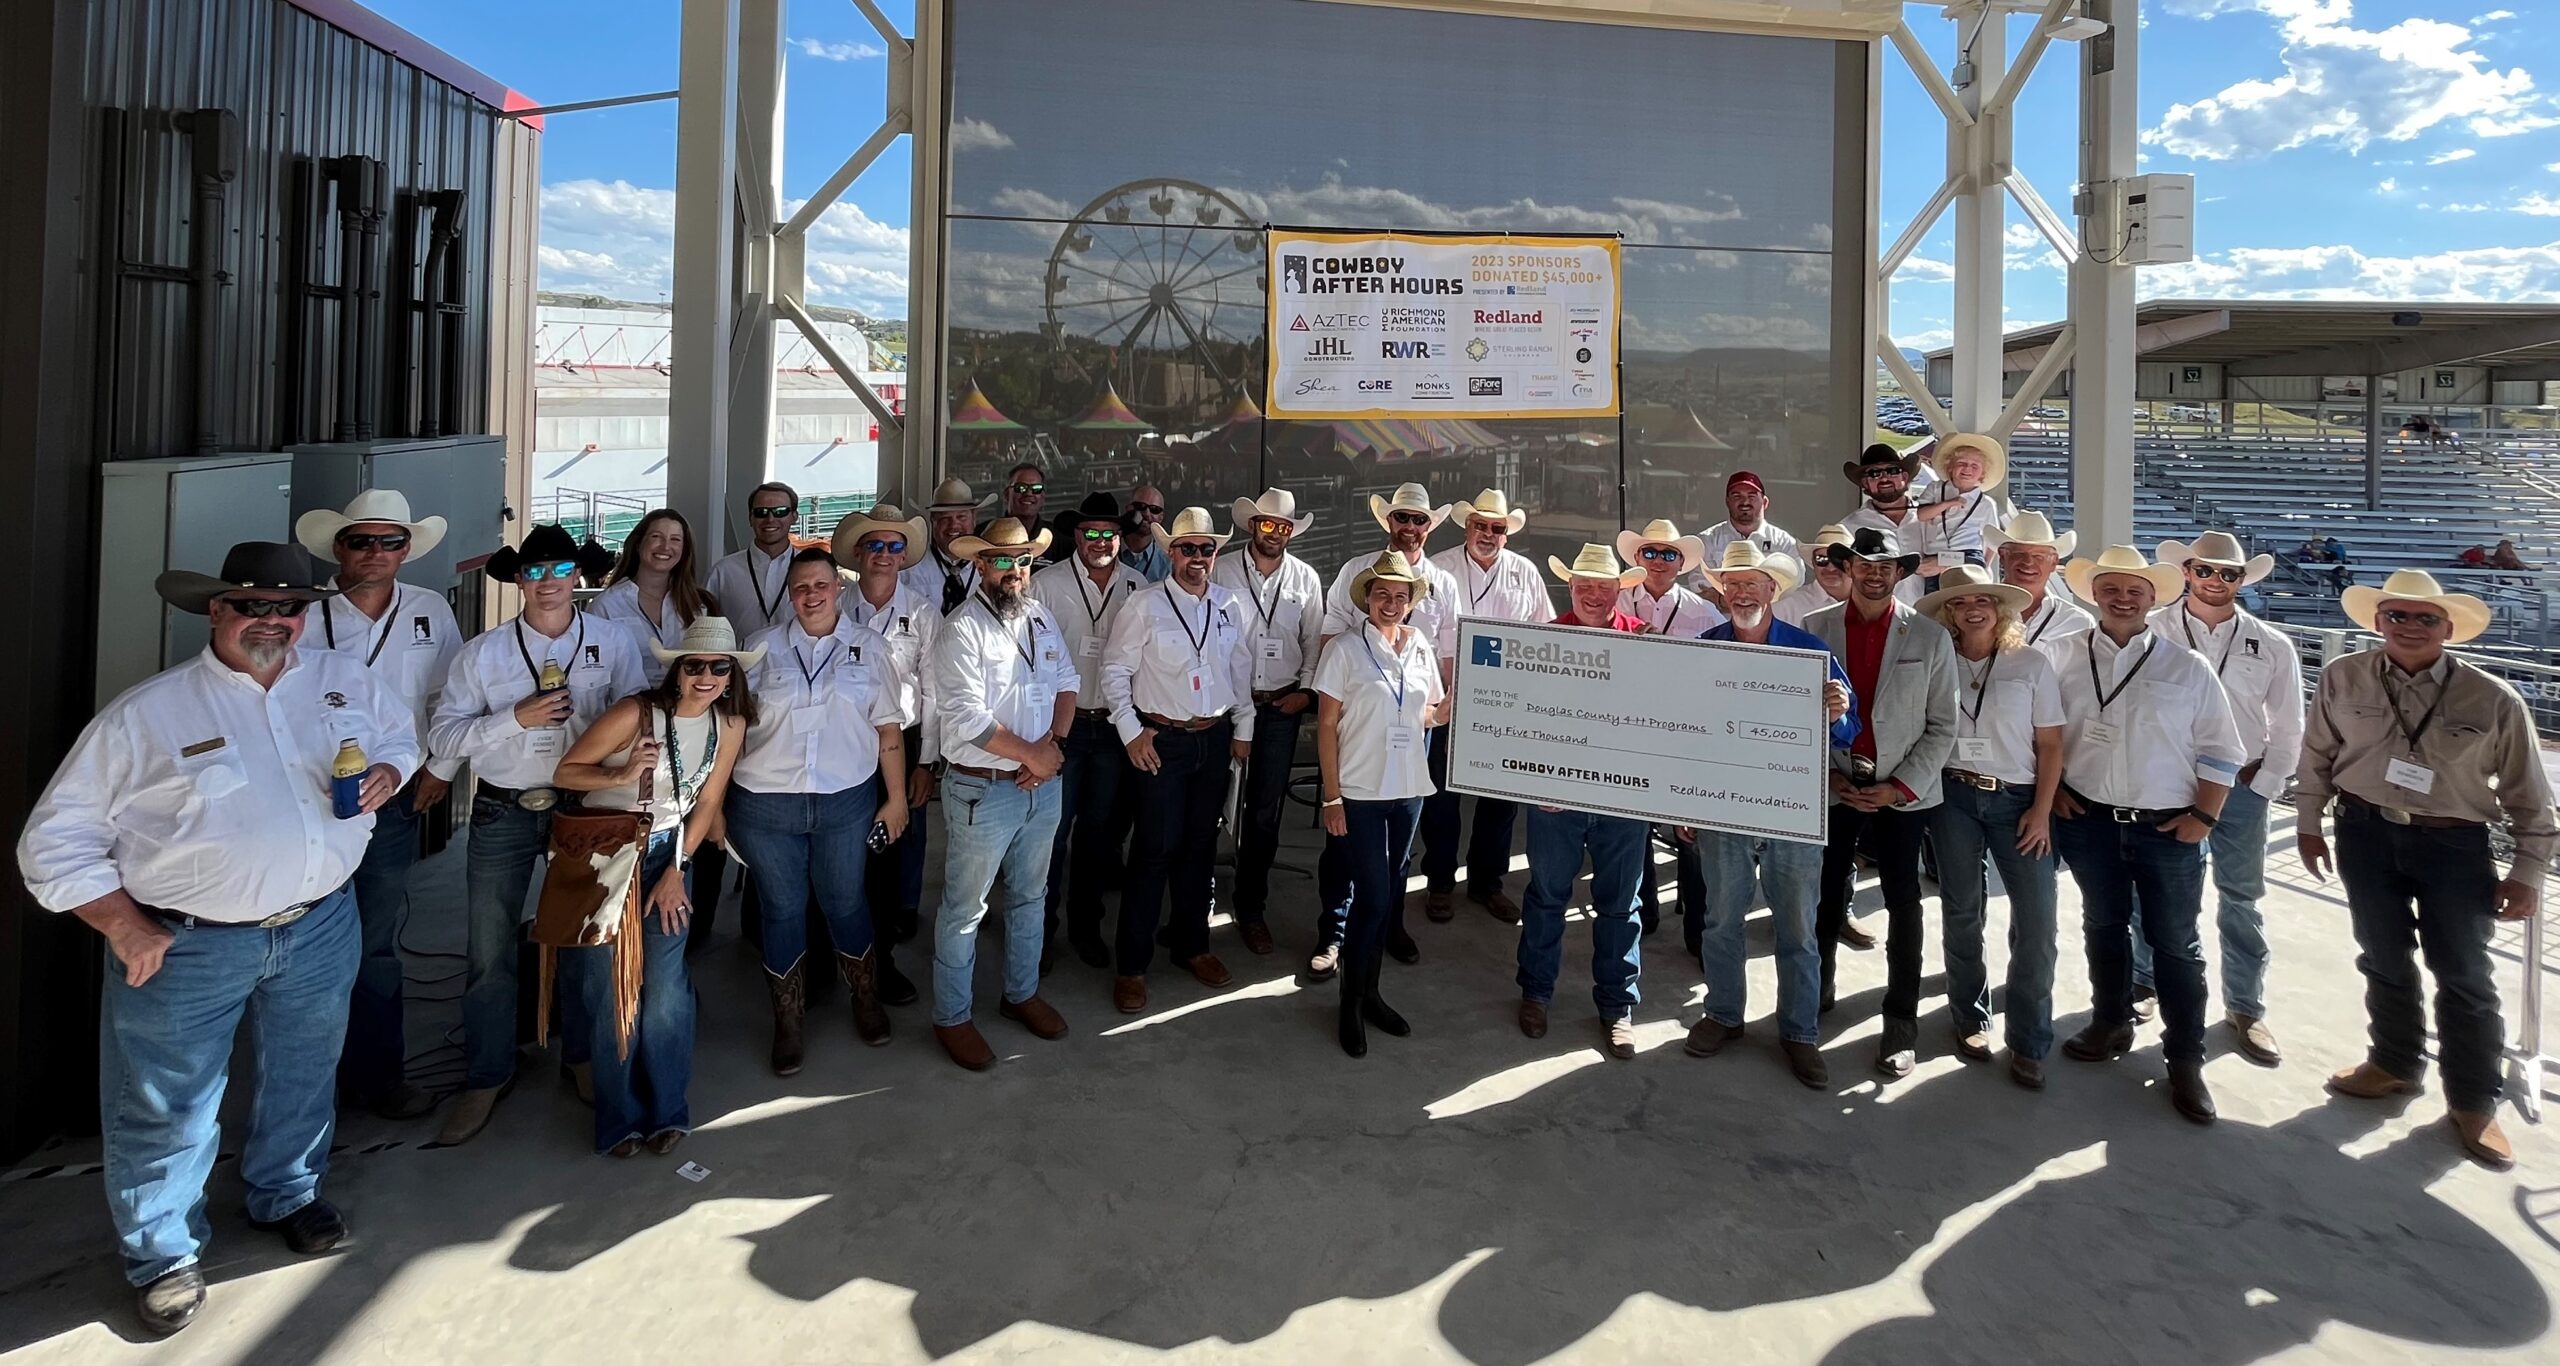 Redland Foundation Coordinates Annual Cowboy After Hours Event